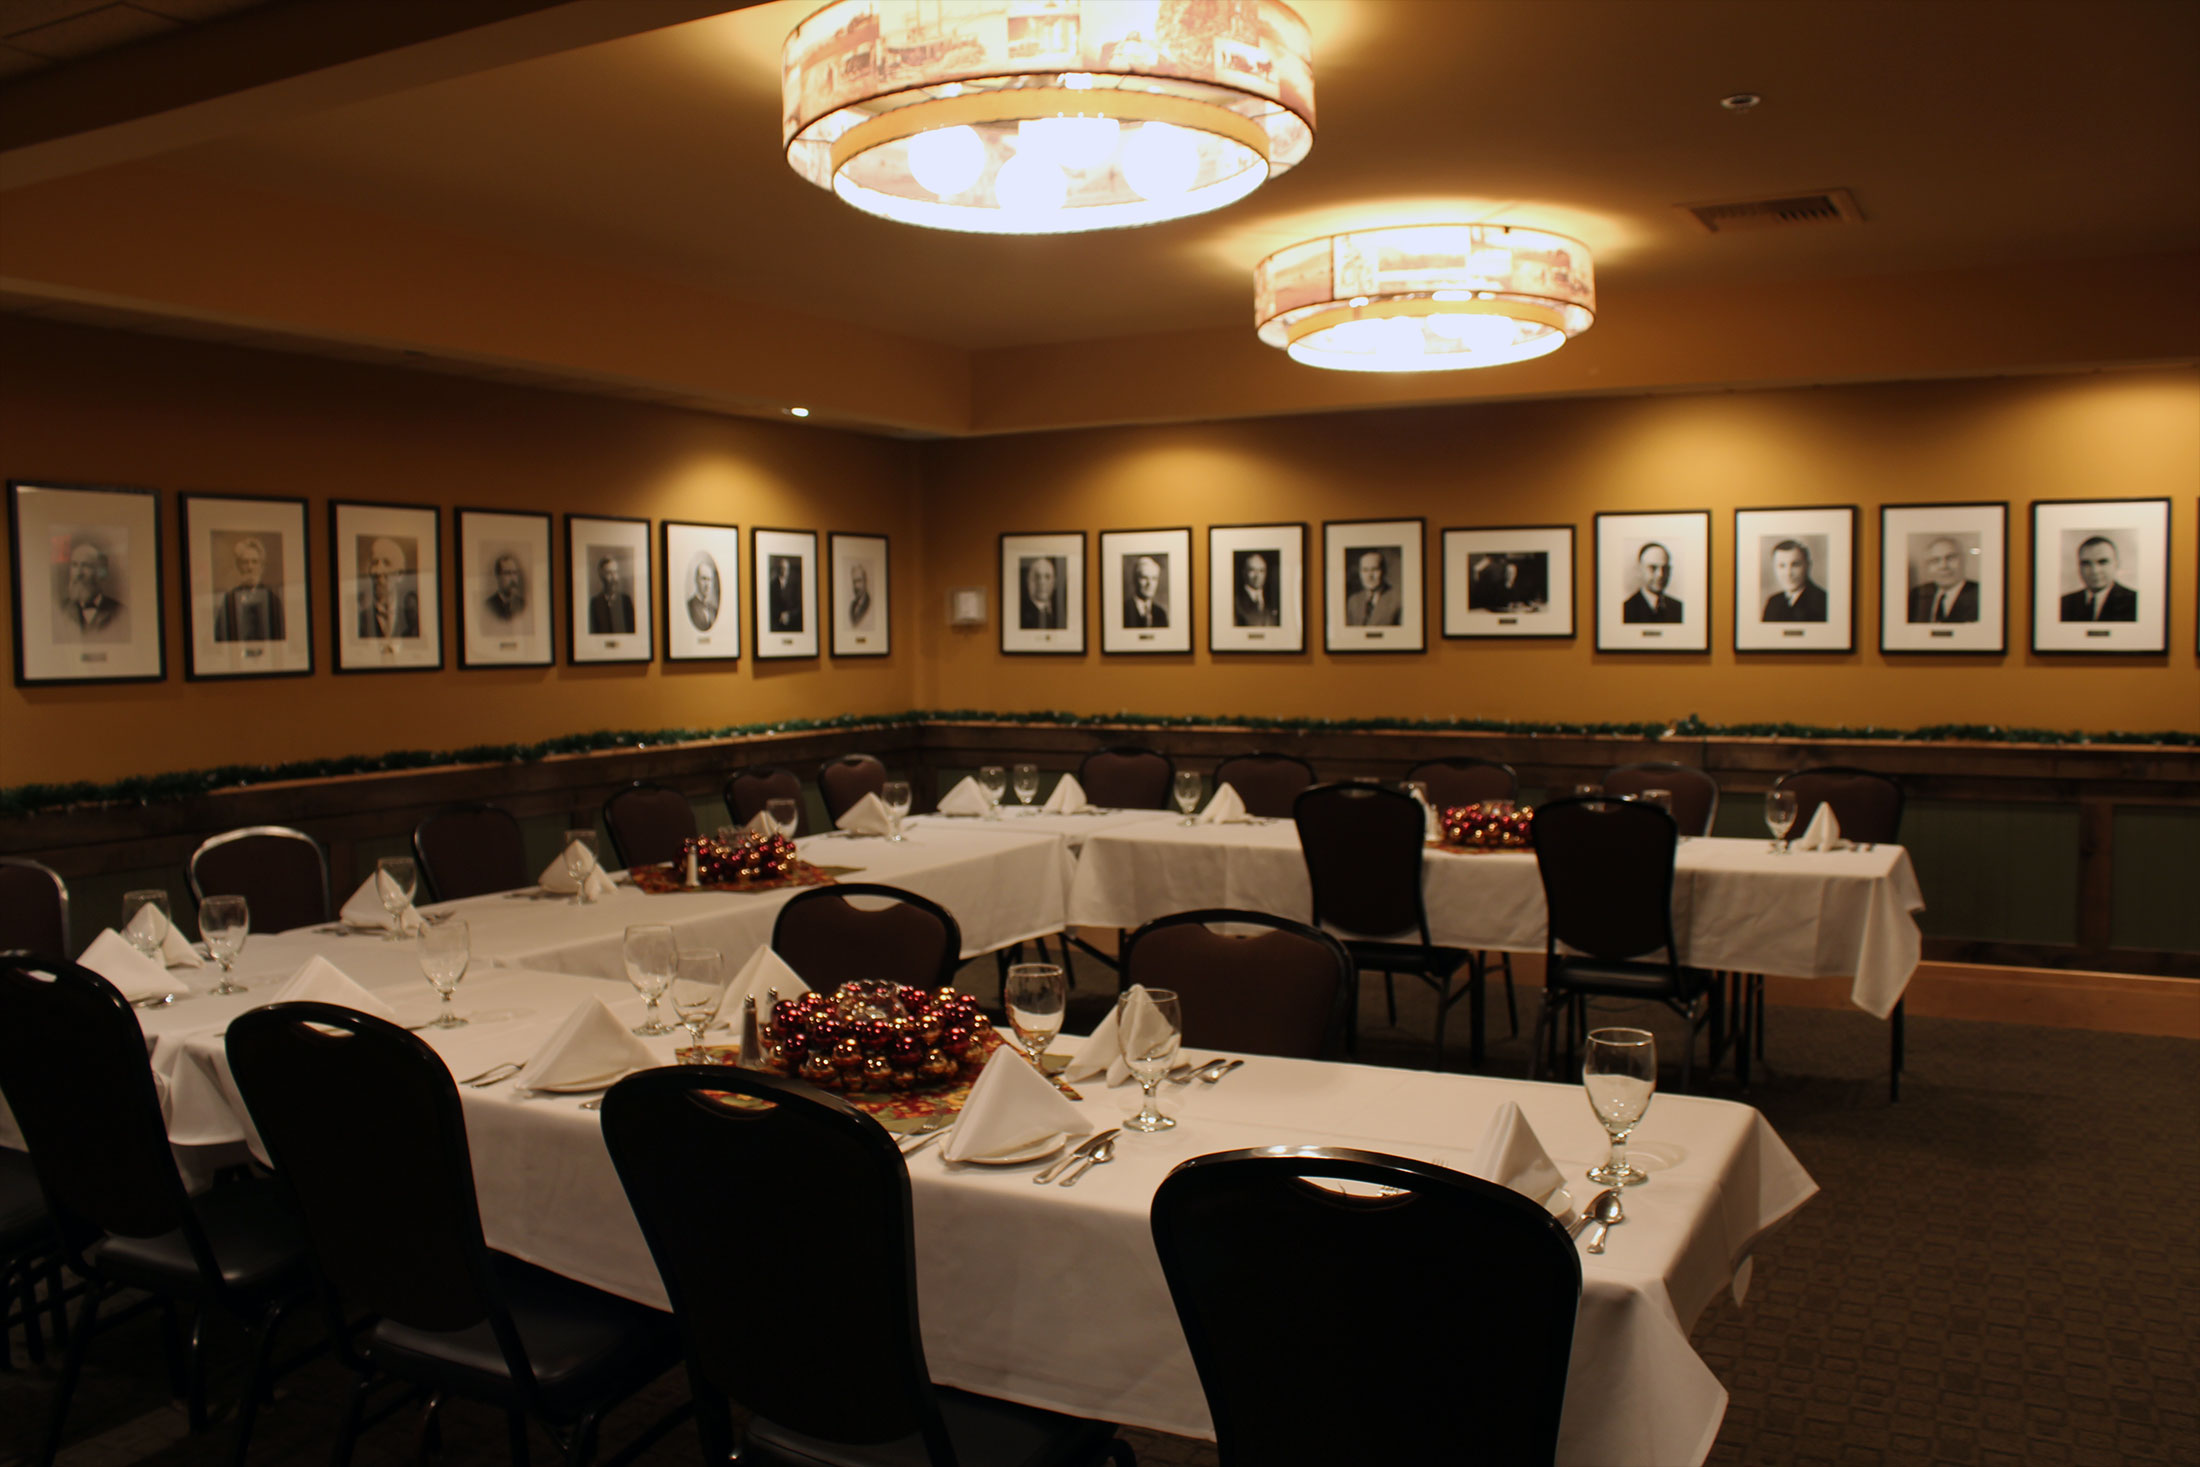 Private dining events in the Governors Room